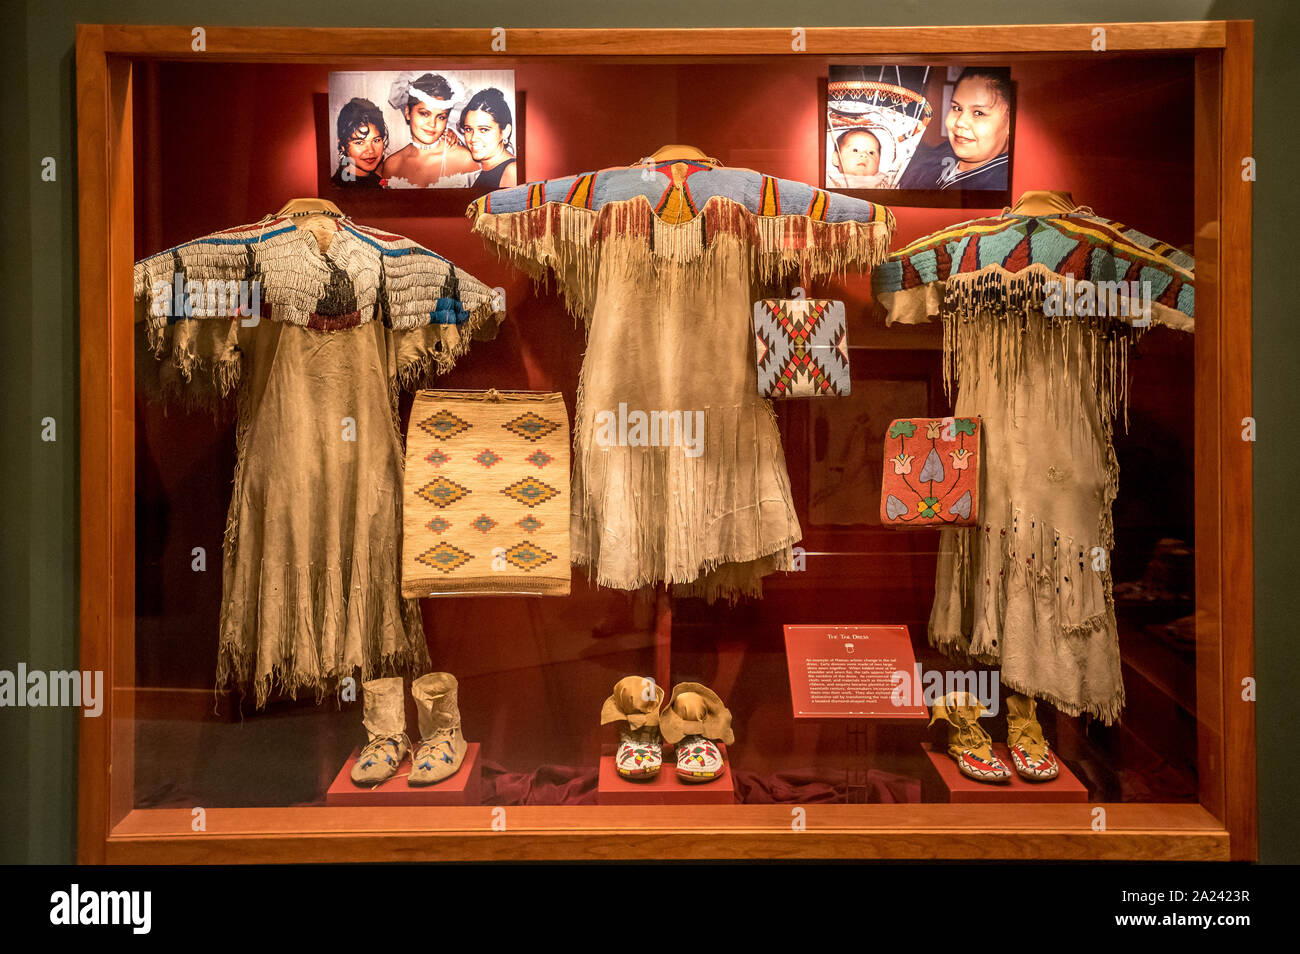 Plateau Native American tail dresses and women's tribal styles on display at the High Desert Museum in Bend, Oregon. Stock Photo